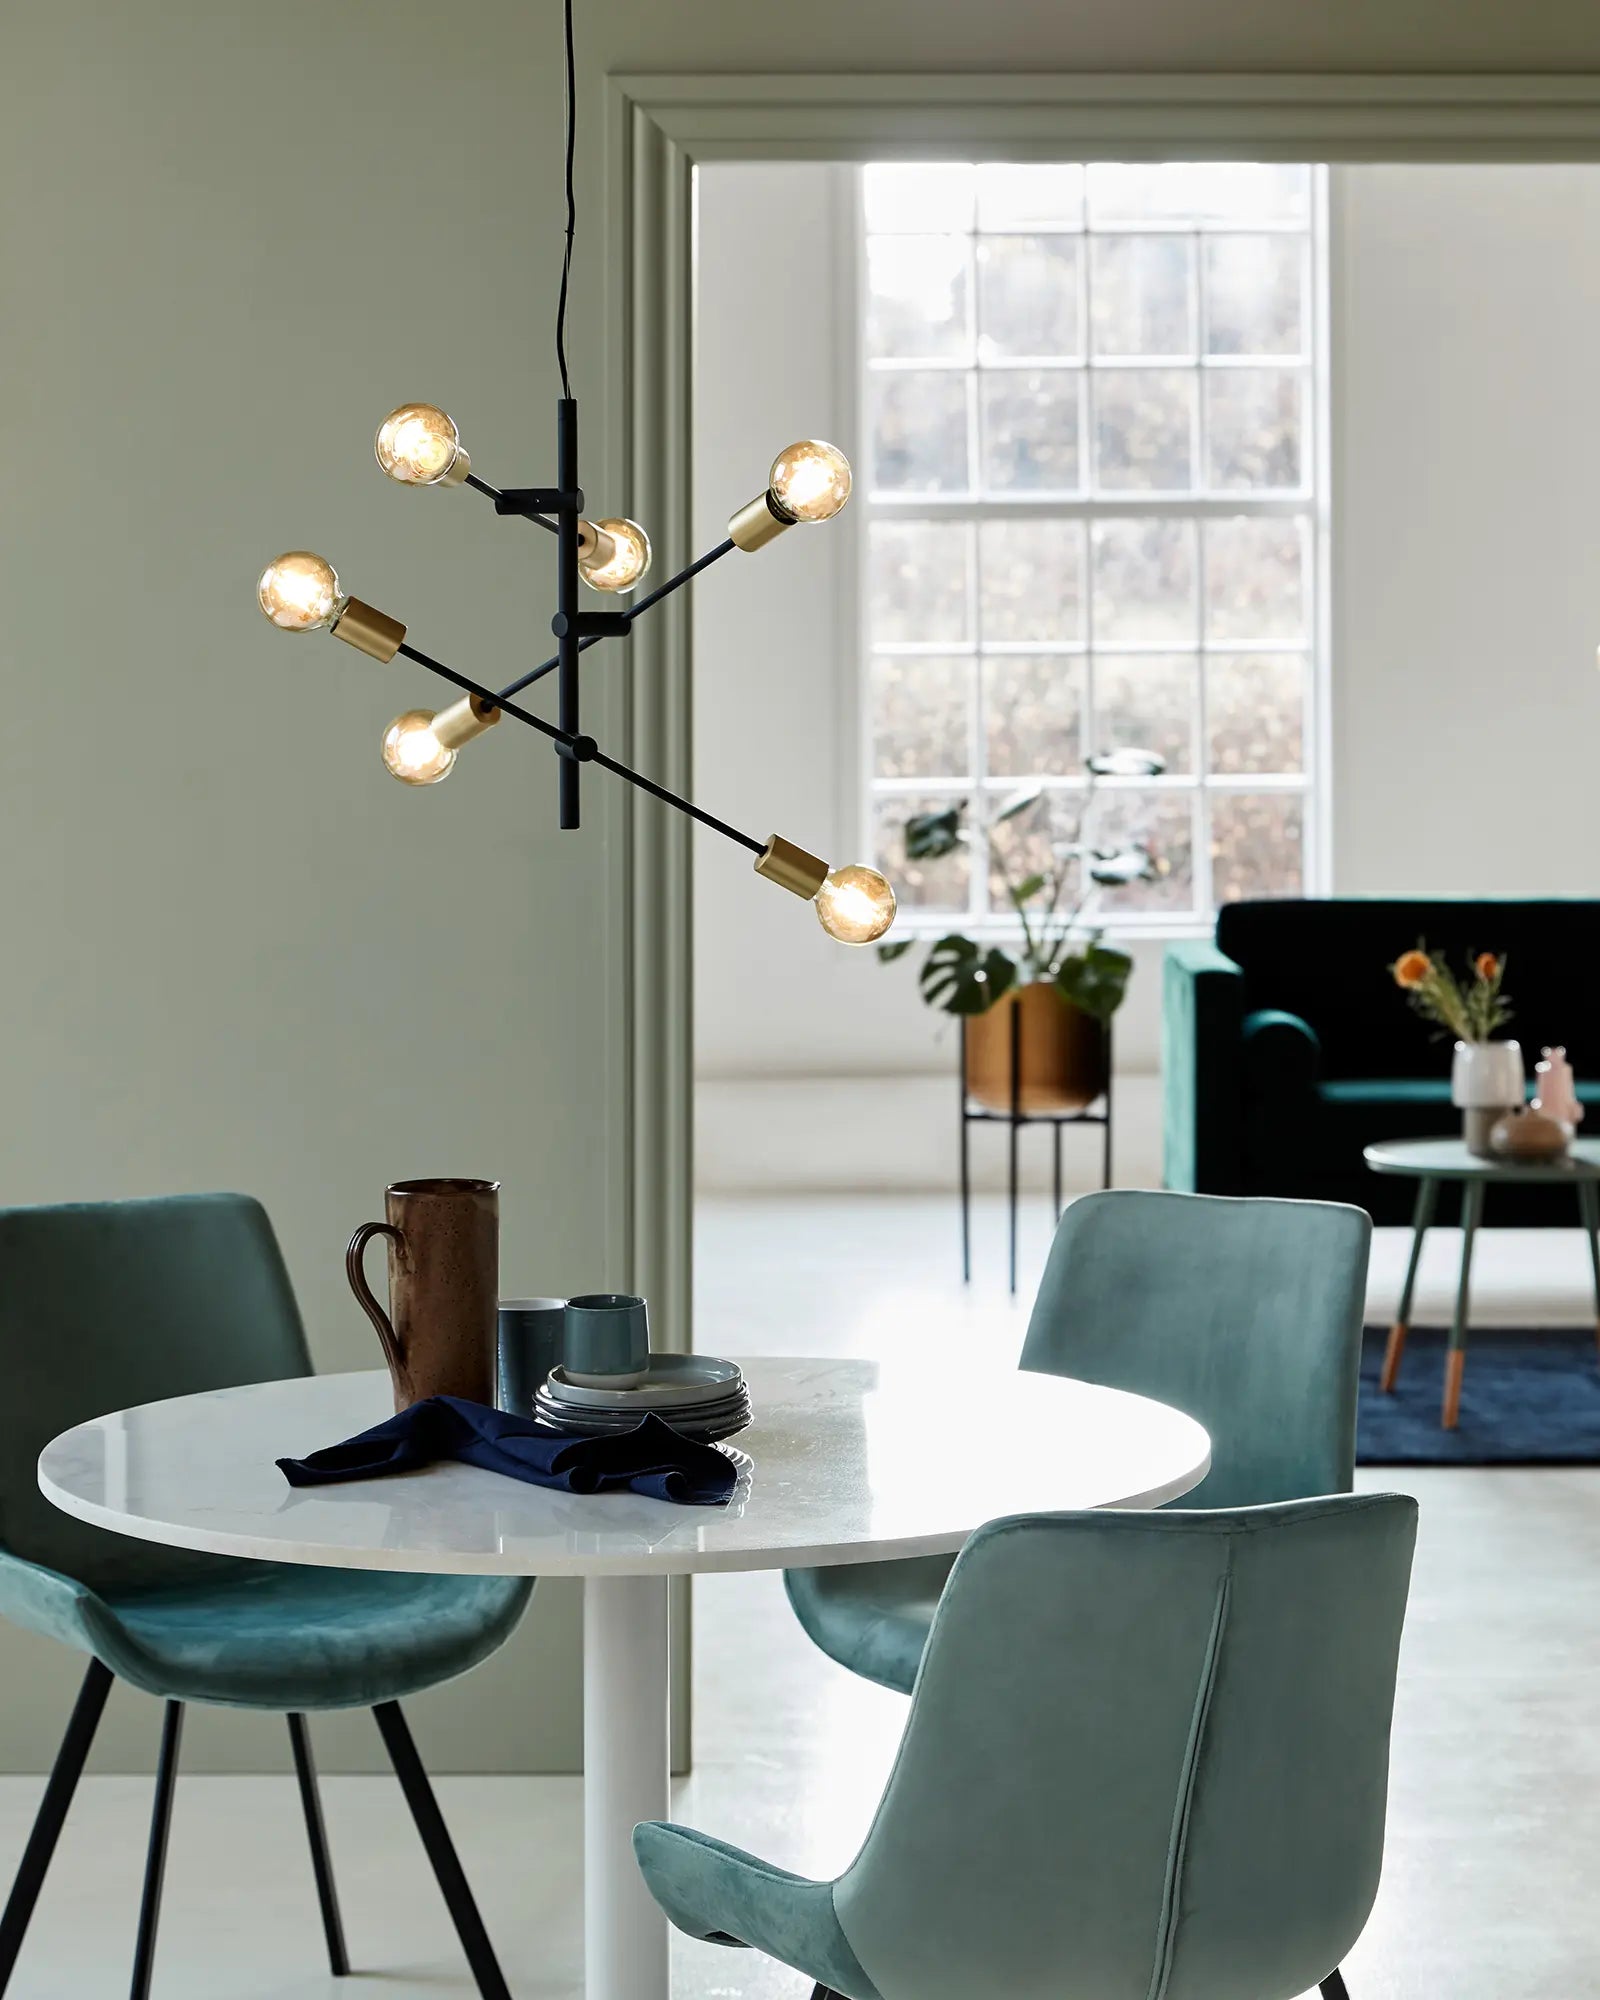 Josefine pendant light in black and brass vertival above a round table